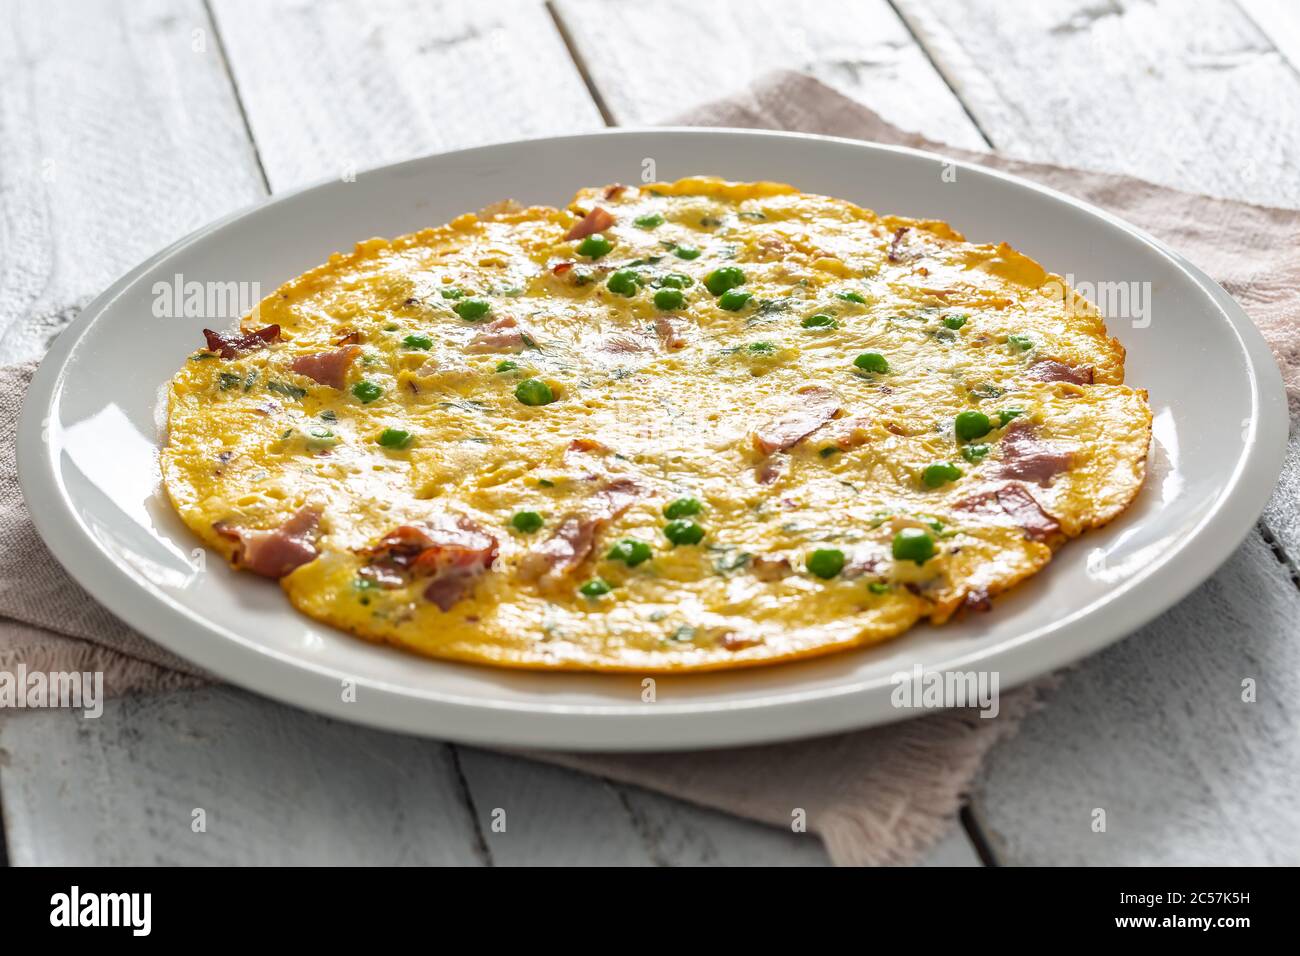 Omelette with prosciutto peas and herbs on white plate Stock Photo